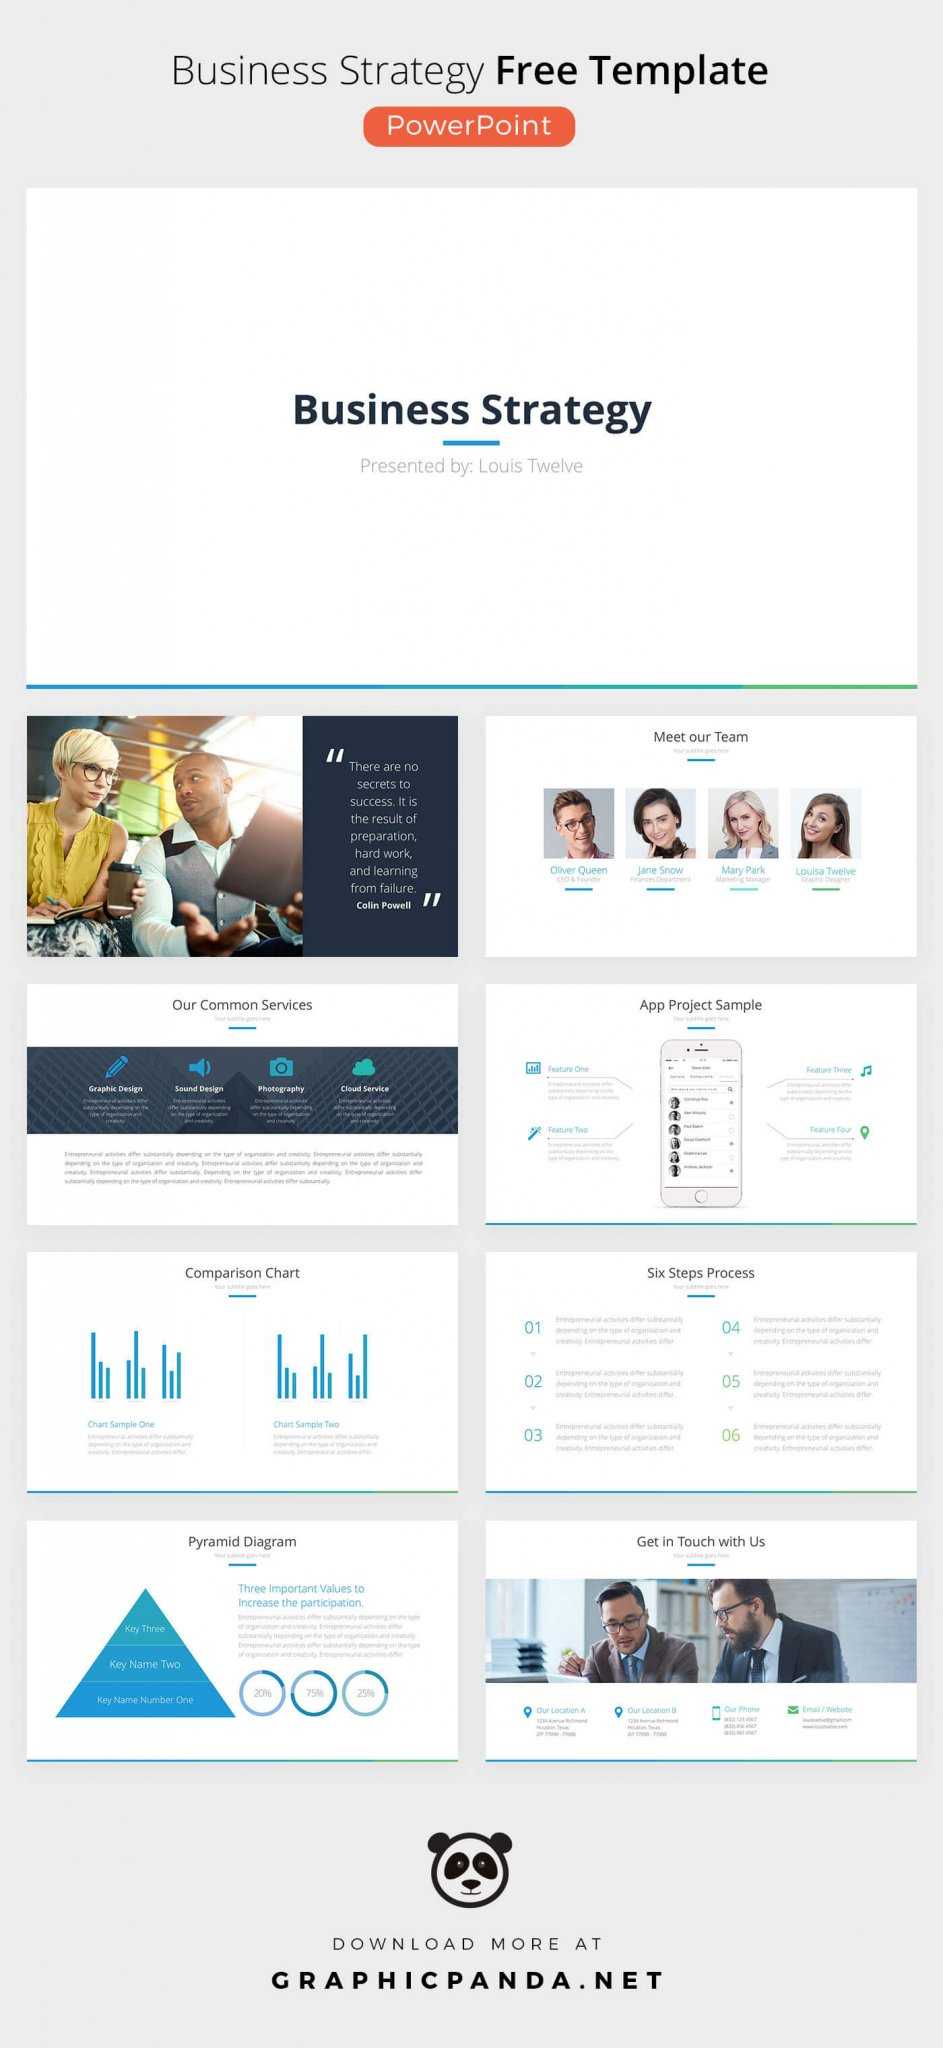 Business Strategy Free Powerpoint Template Ppt / Pptx For Biography Powerpoint Template